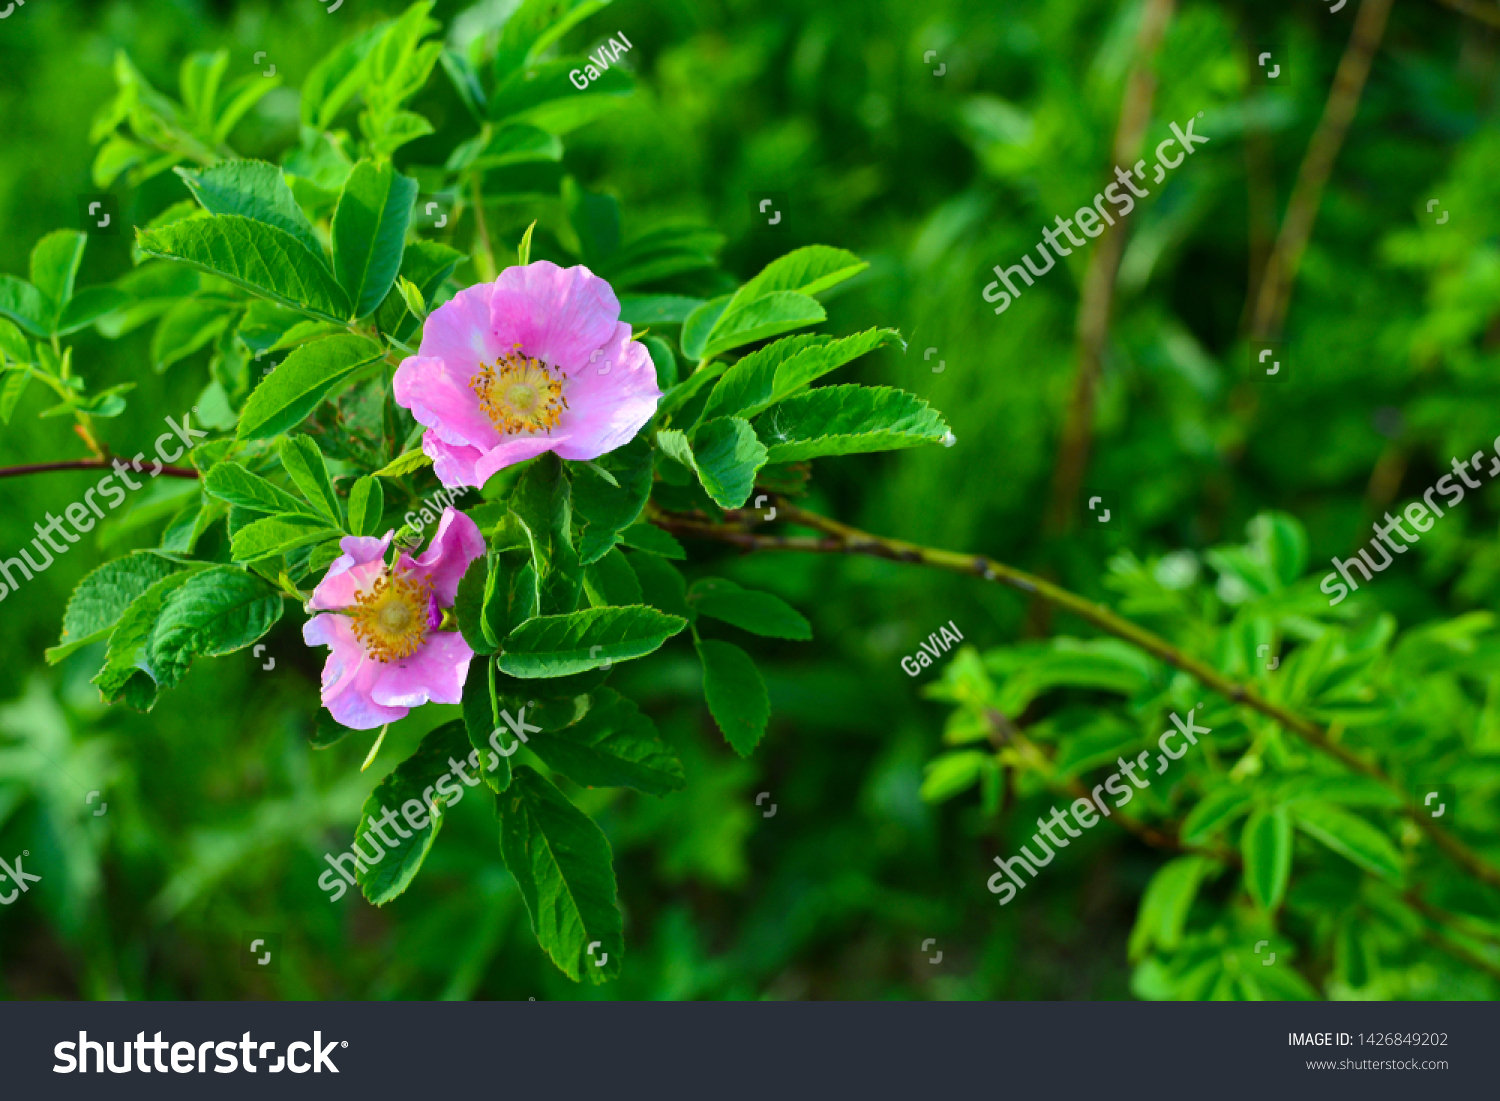 Wild pink rose in nature. Picture of wild pink rose in nature #1426849202